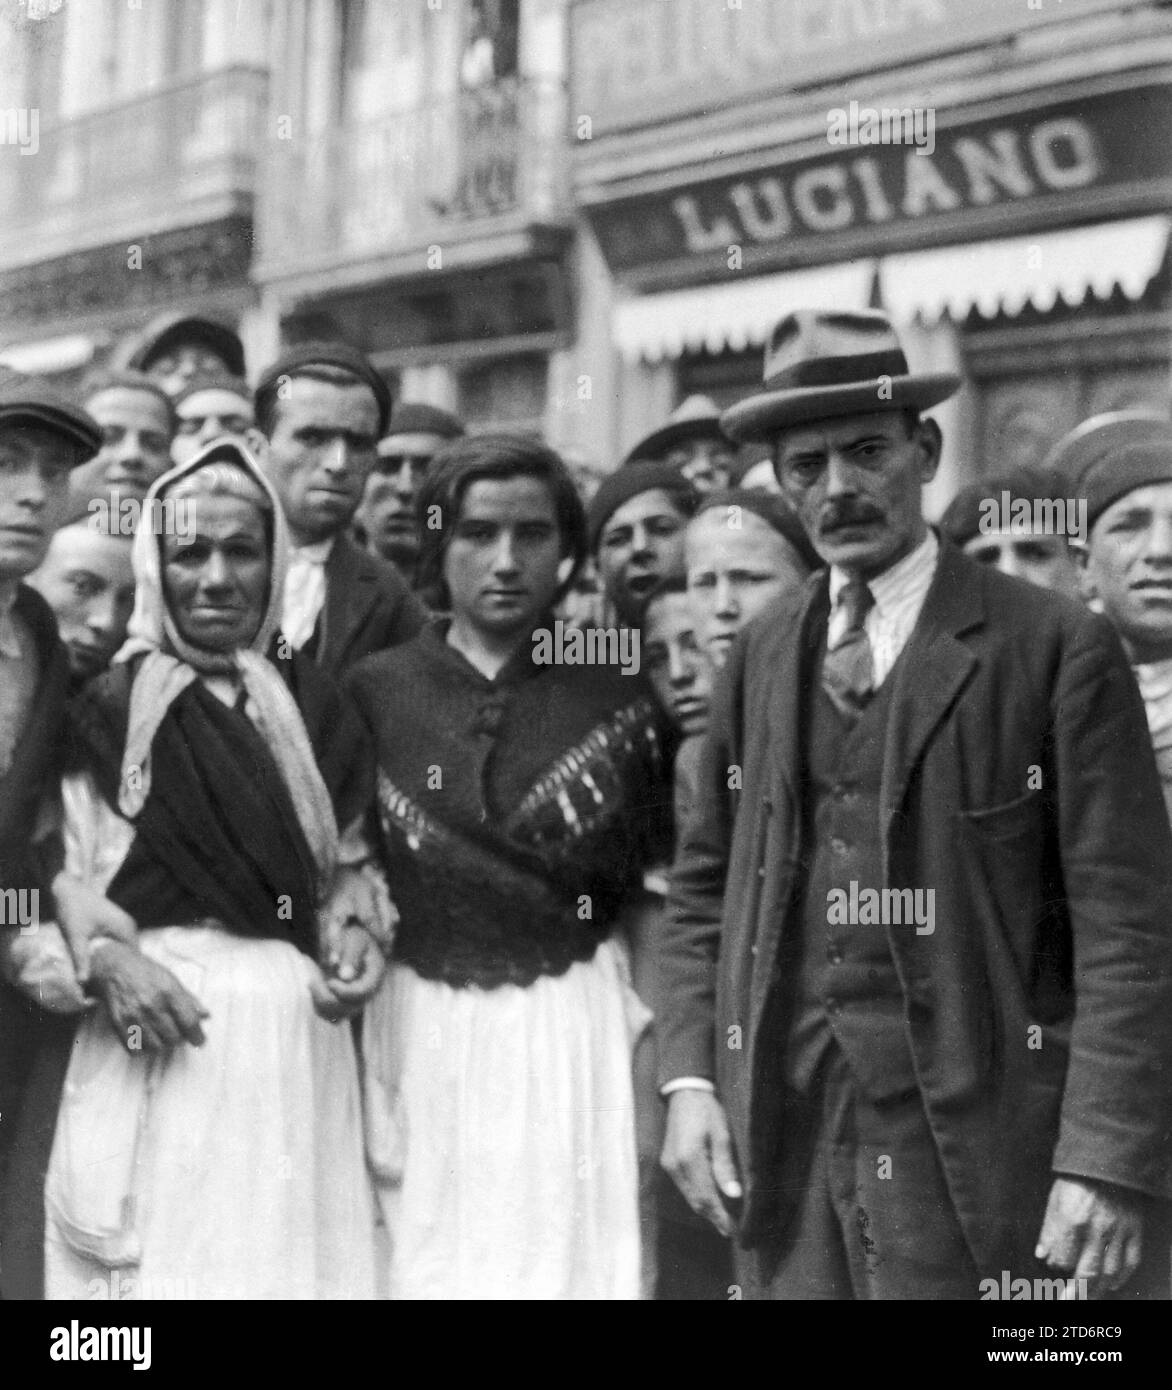 08/29/1923. La Coruna. After the Pardon. The Mother (1) and Sister (2) of Corporal Sánchez Barroso Surrounded by the People, Going to the Town Hall to Express Their Gratitude for the Pardon Granted to Him. Credit: Album / Archivo ABC / González Stock Photo